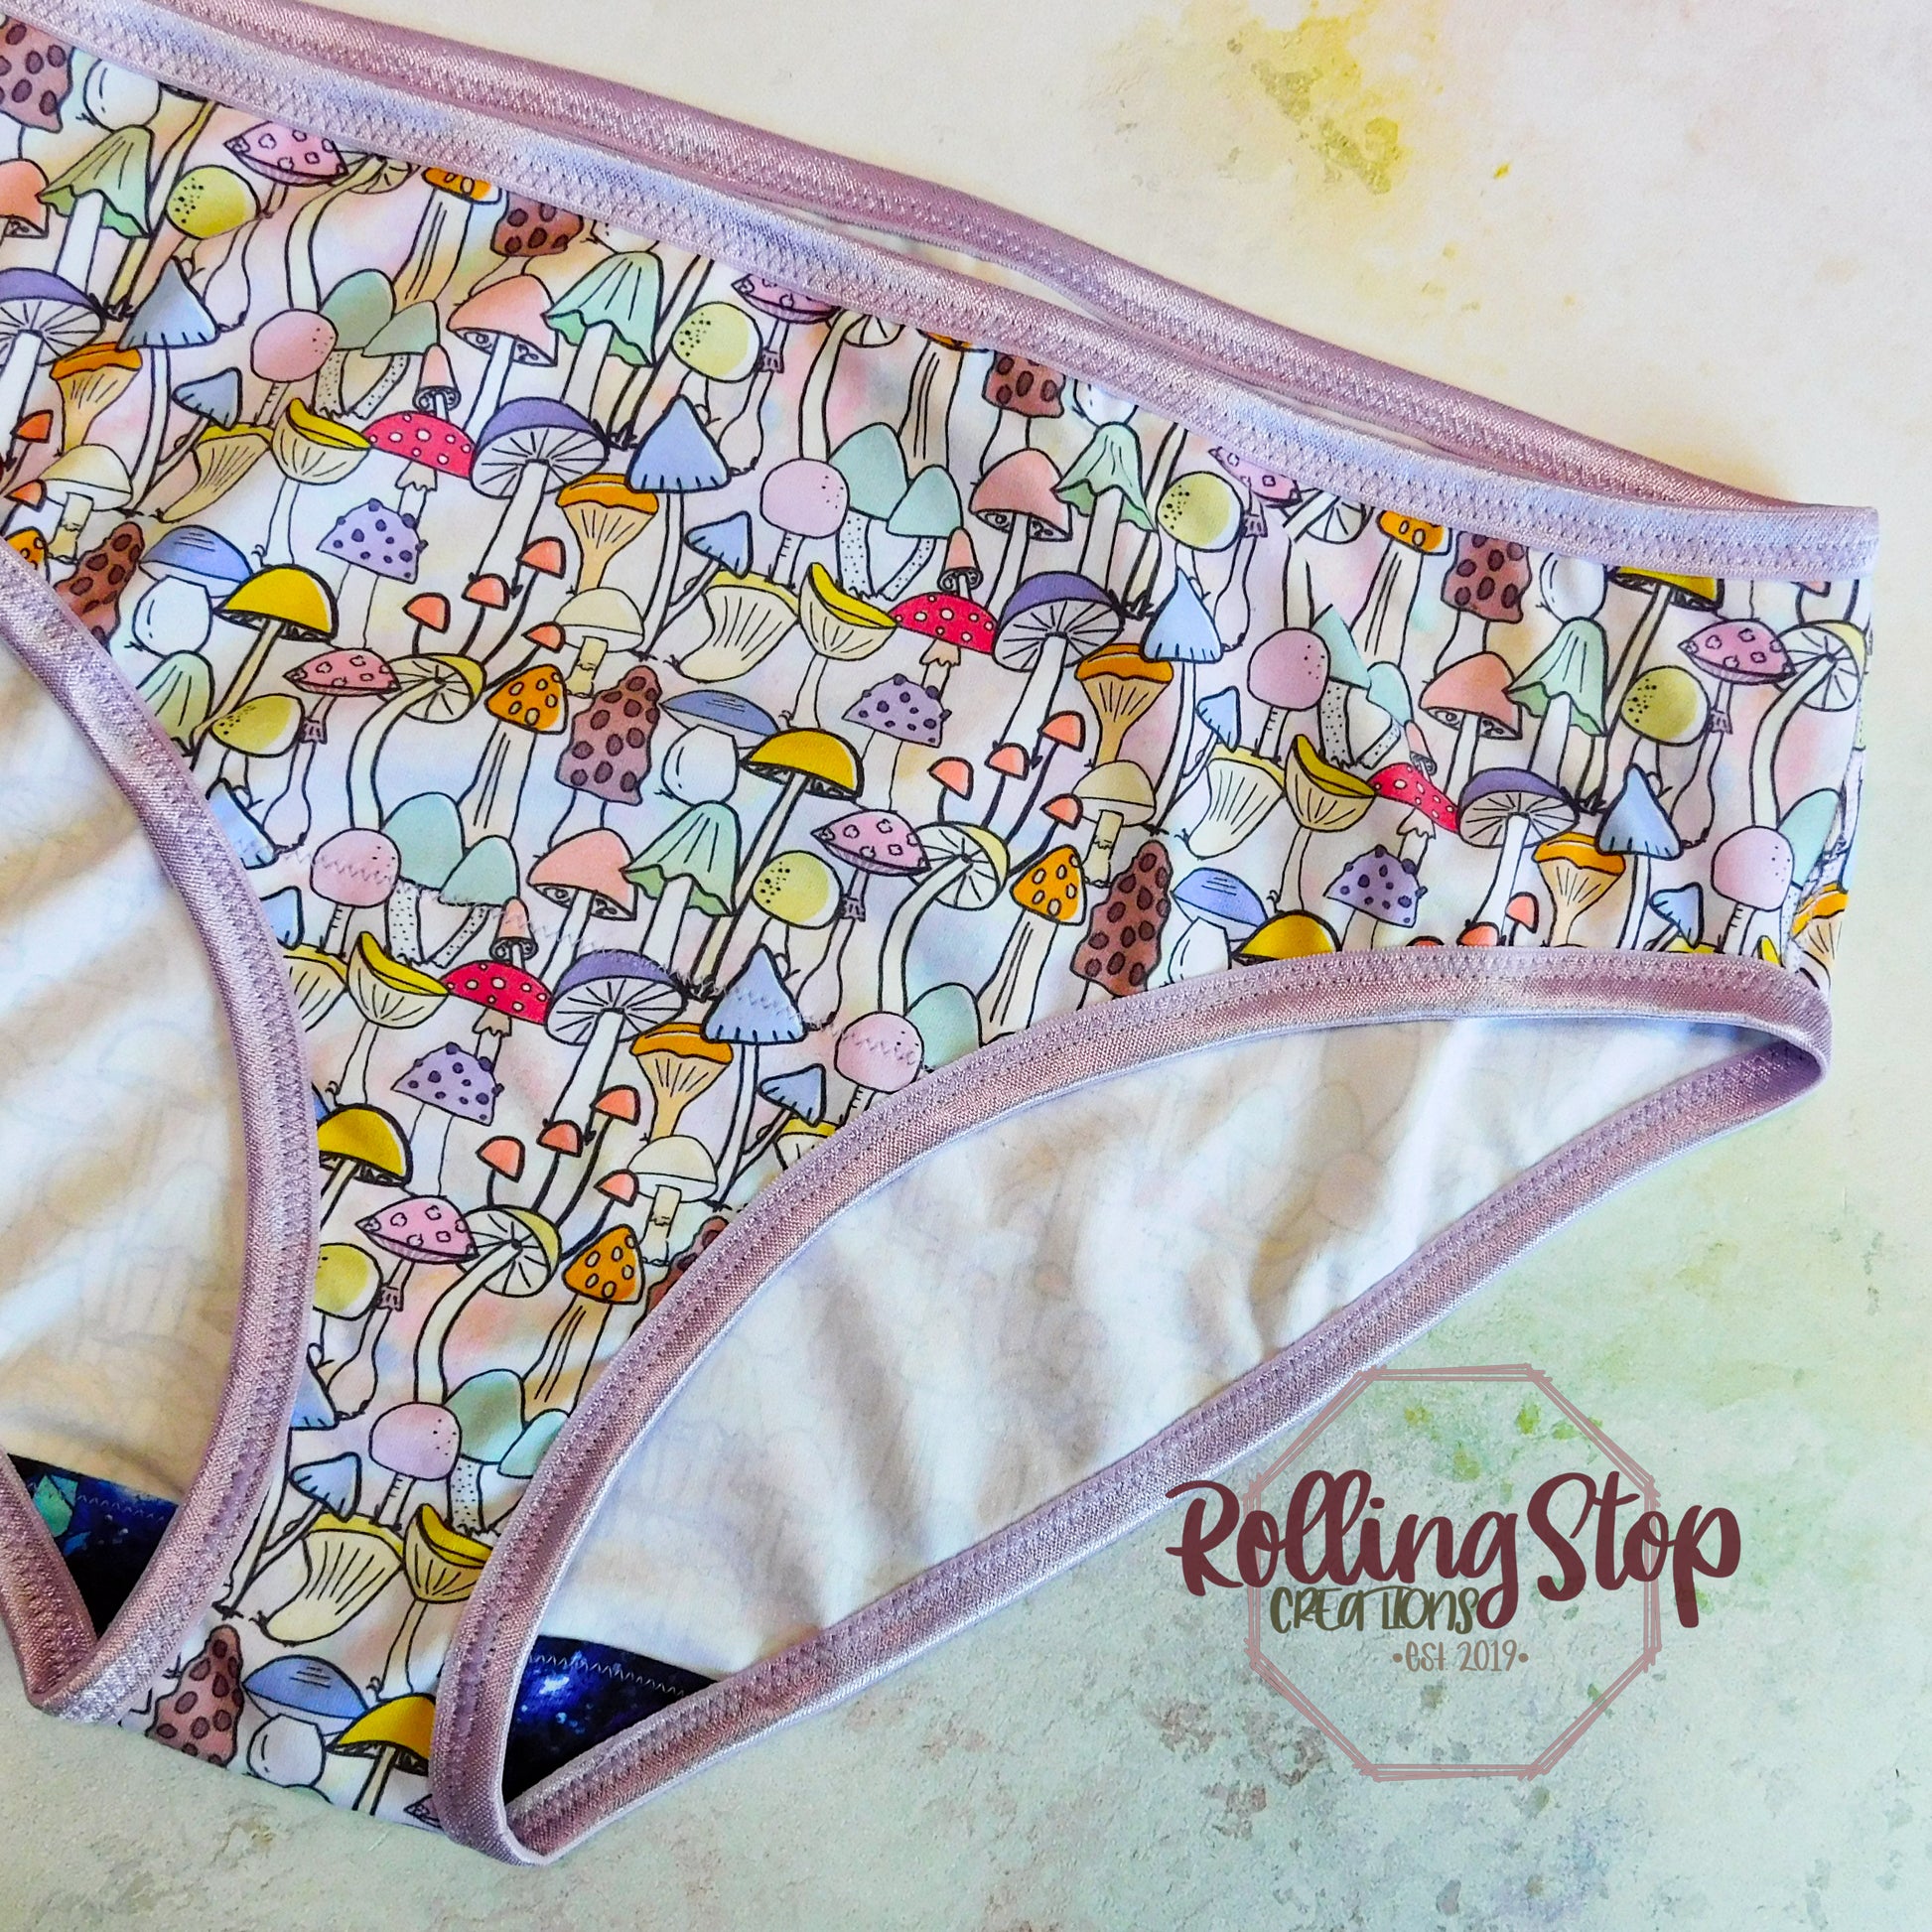 Pastel Mushies Comfy Bra by Rolling Stop Creations sold by Rolling Stop Creations Accessories - Comfy Bra - Comfy Cloth